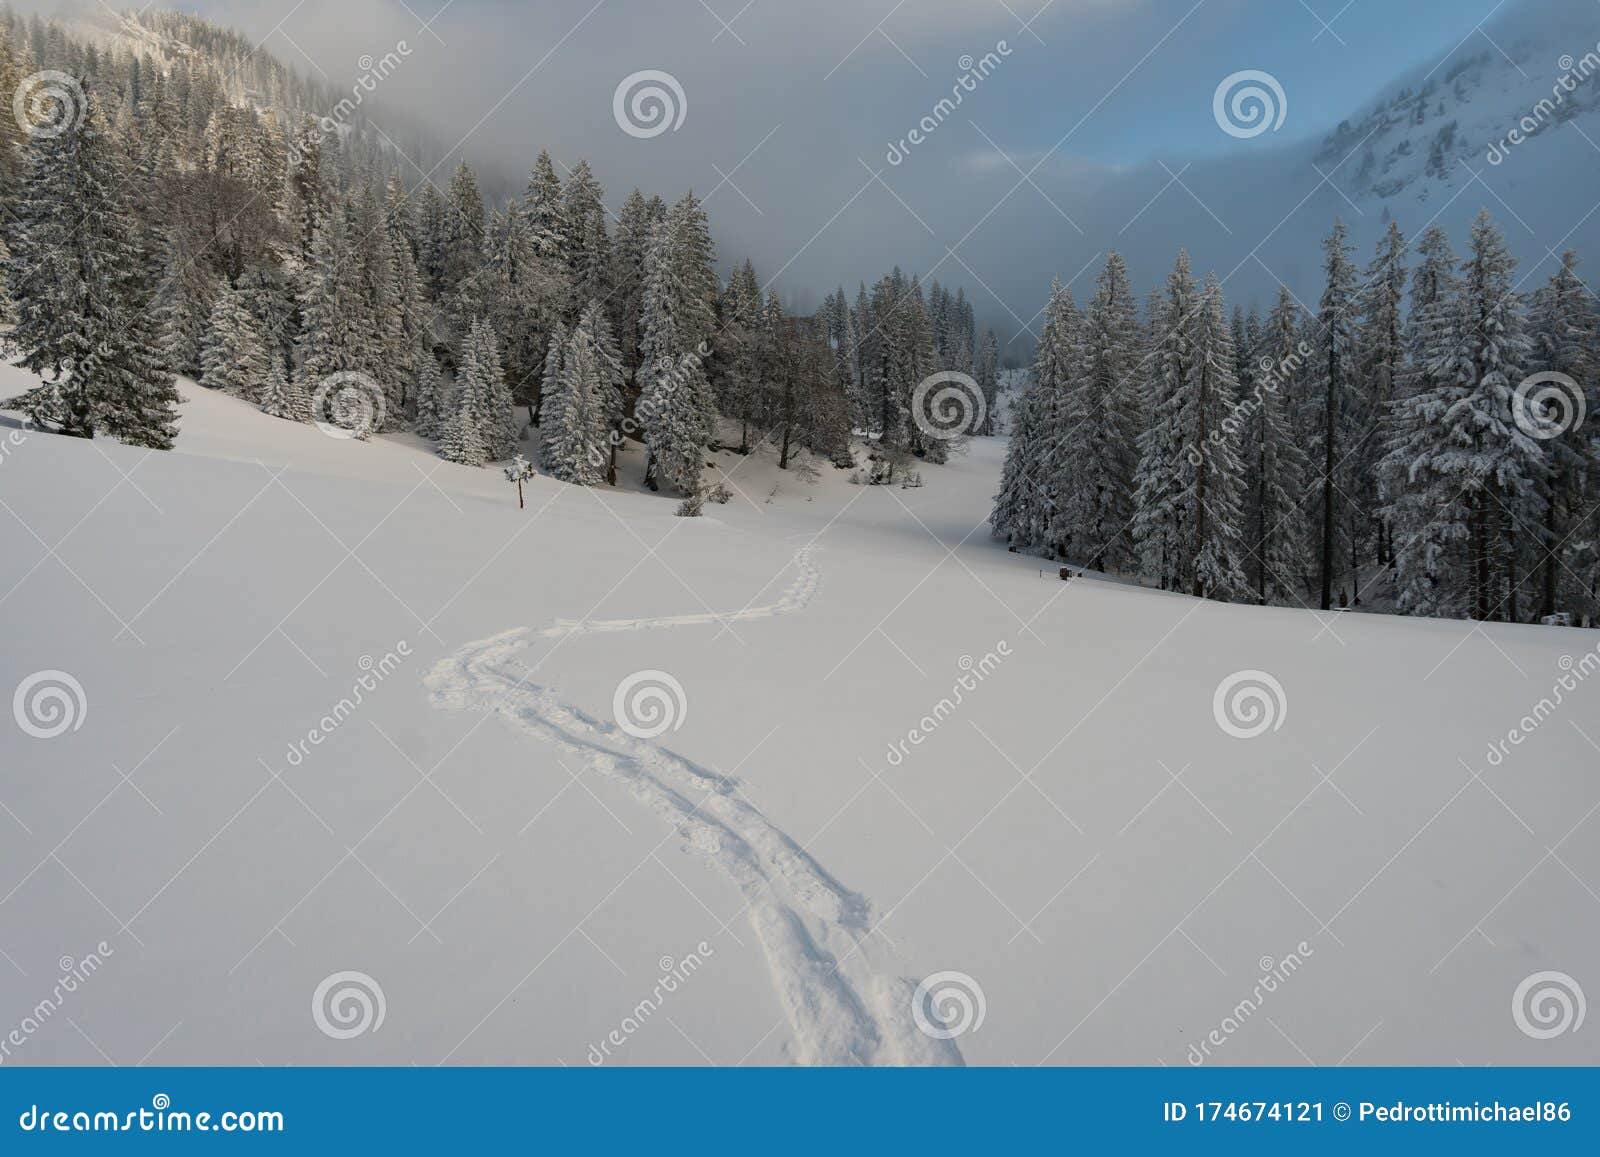 snowshoe tour on the hochgrat in the allgau